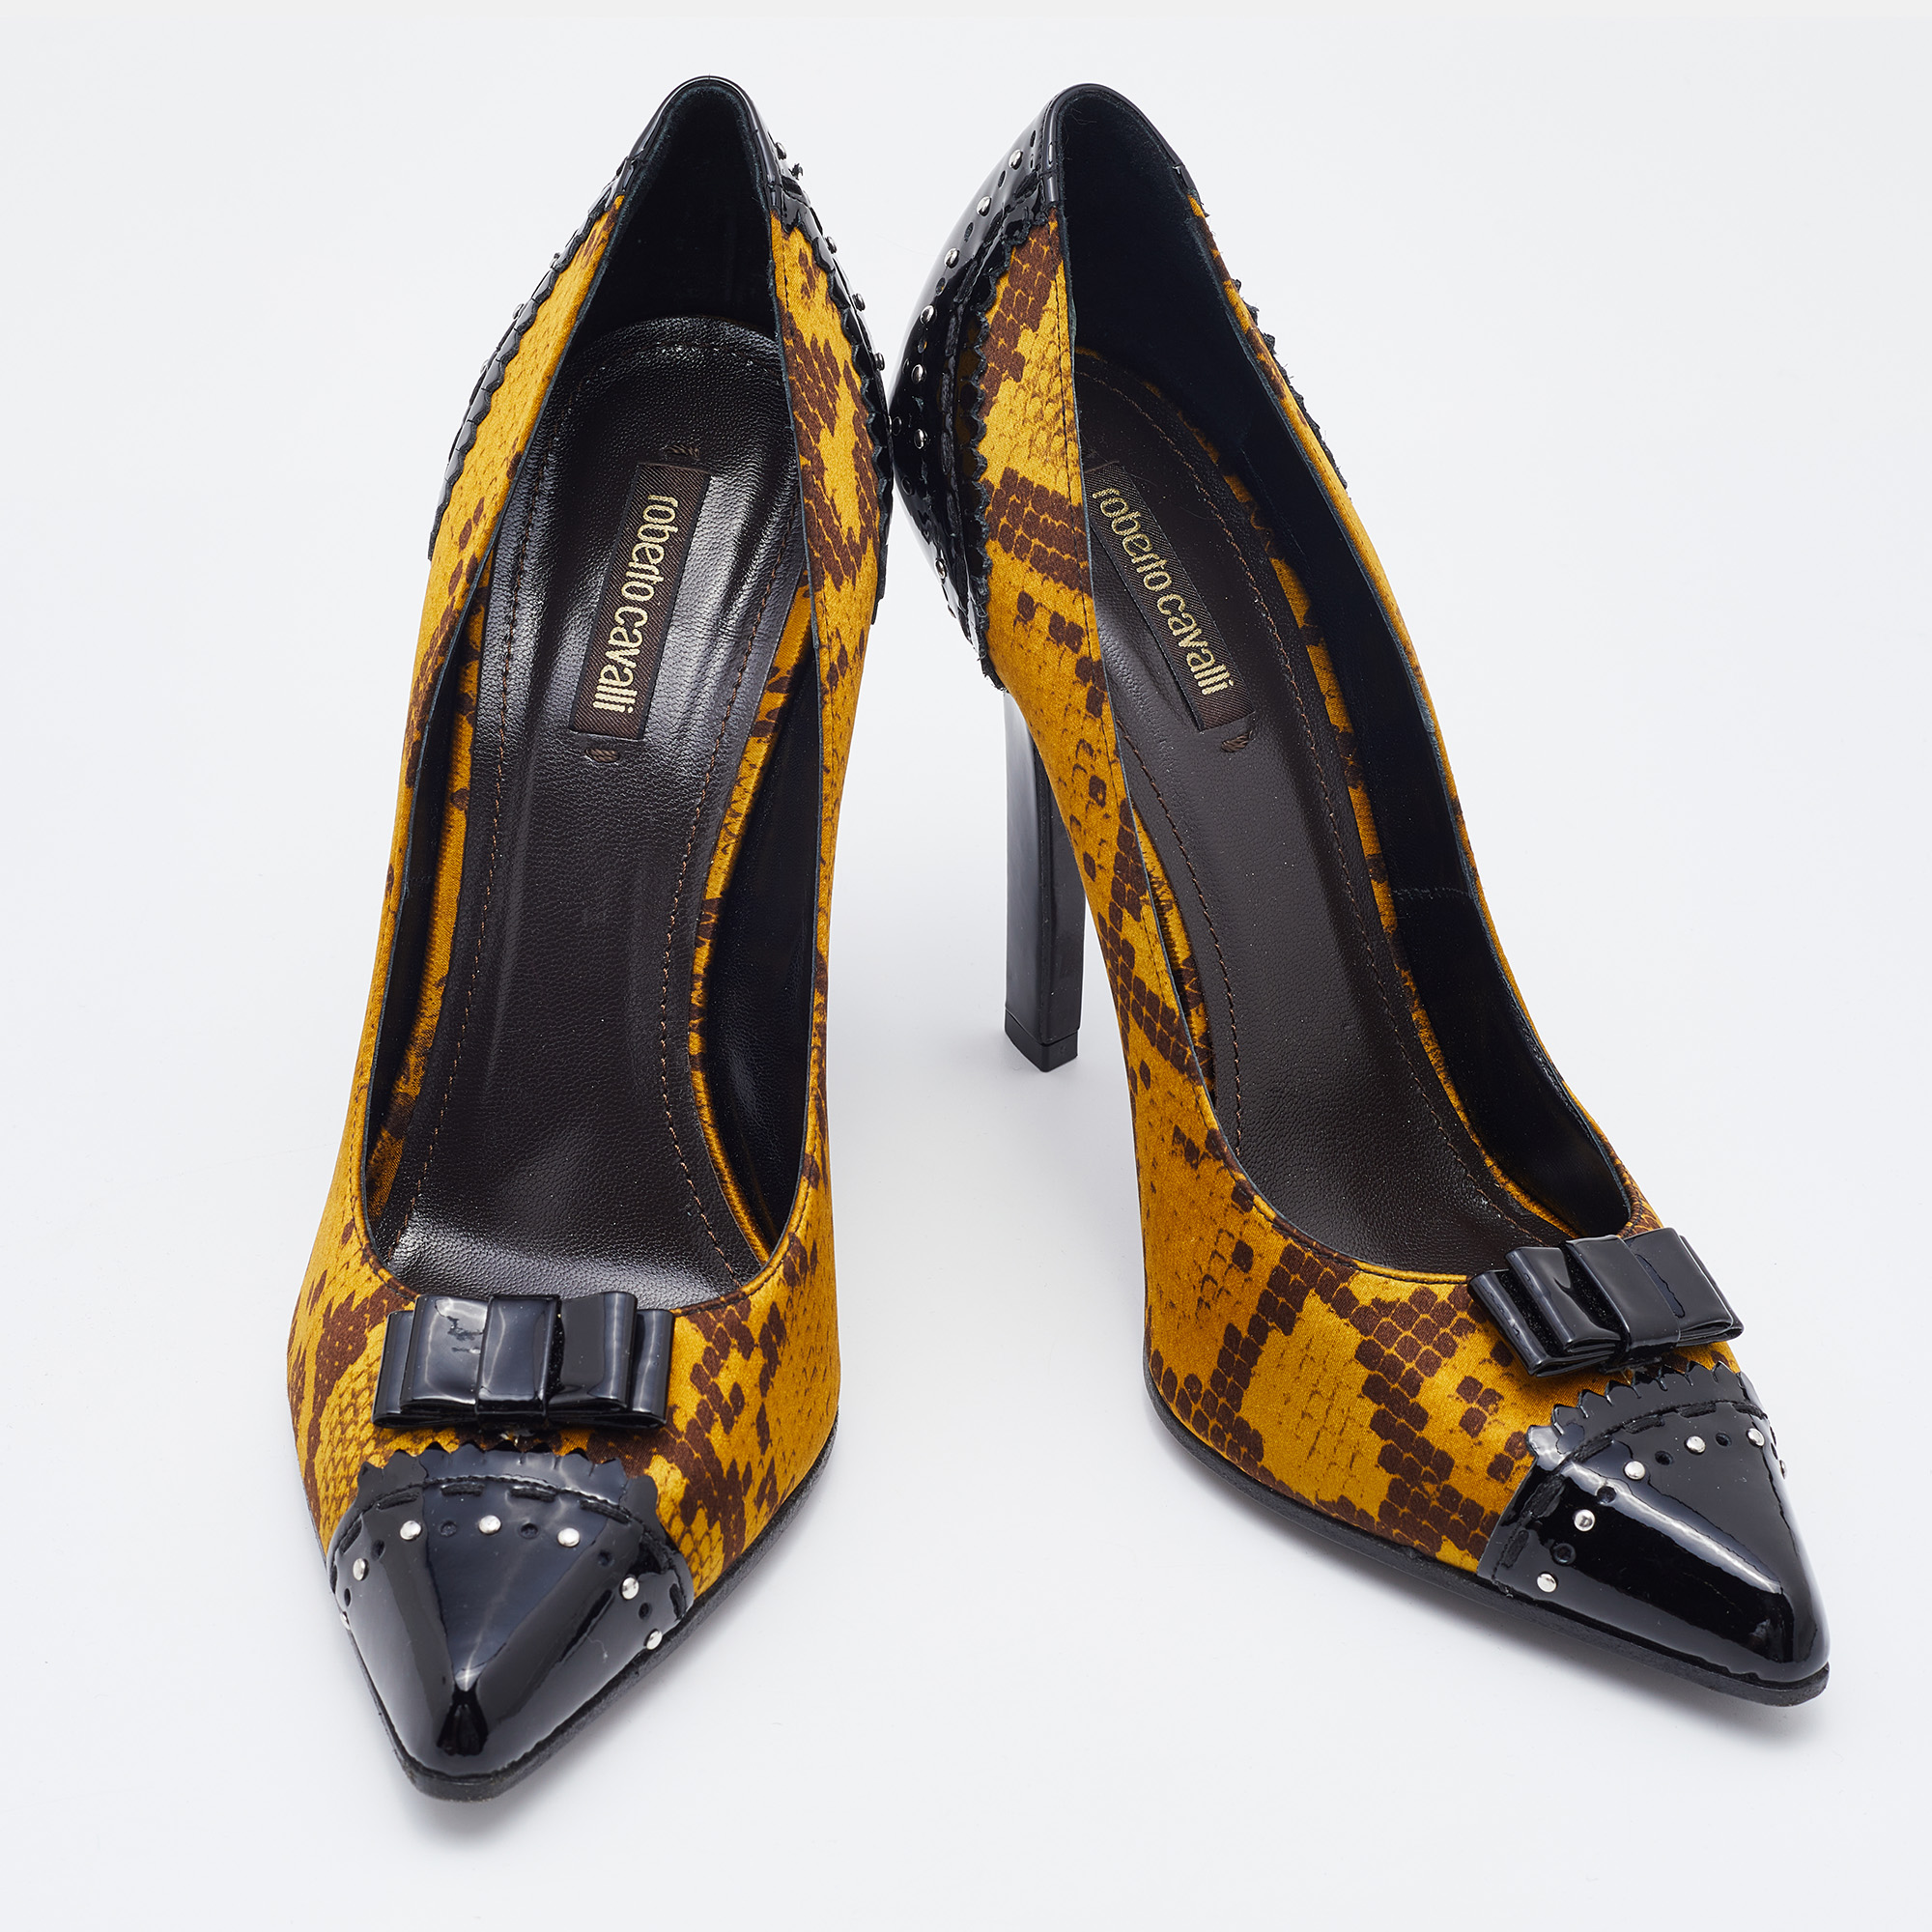 Roberto Cavalli Multicolor Snakeskin Print Satin And Patent Leather Bow Pumps Size 40